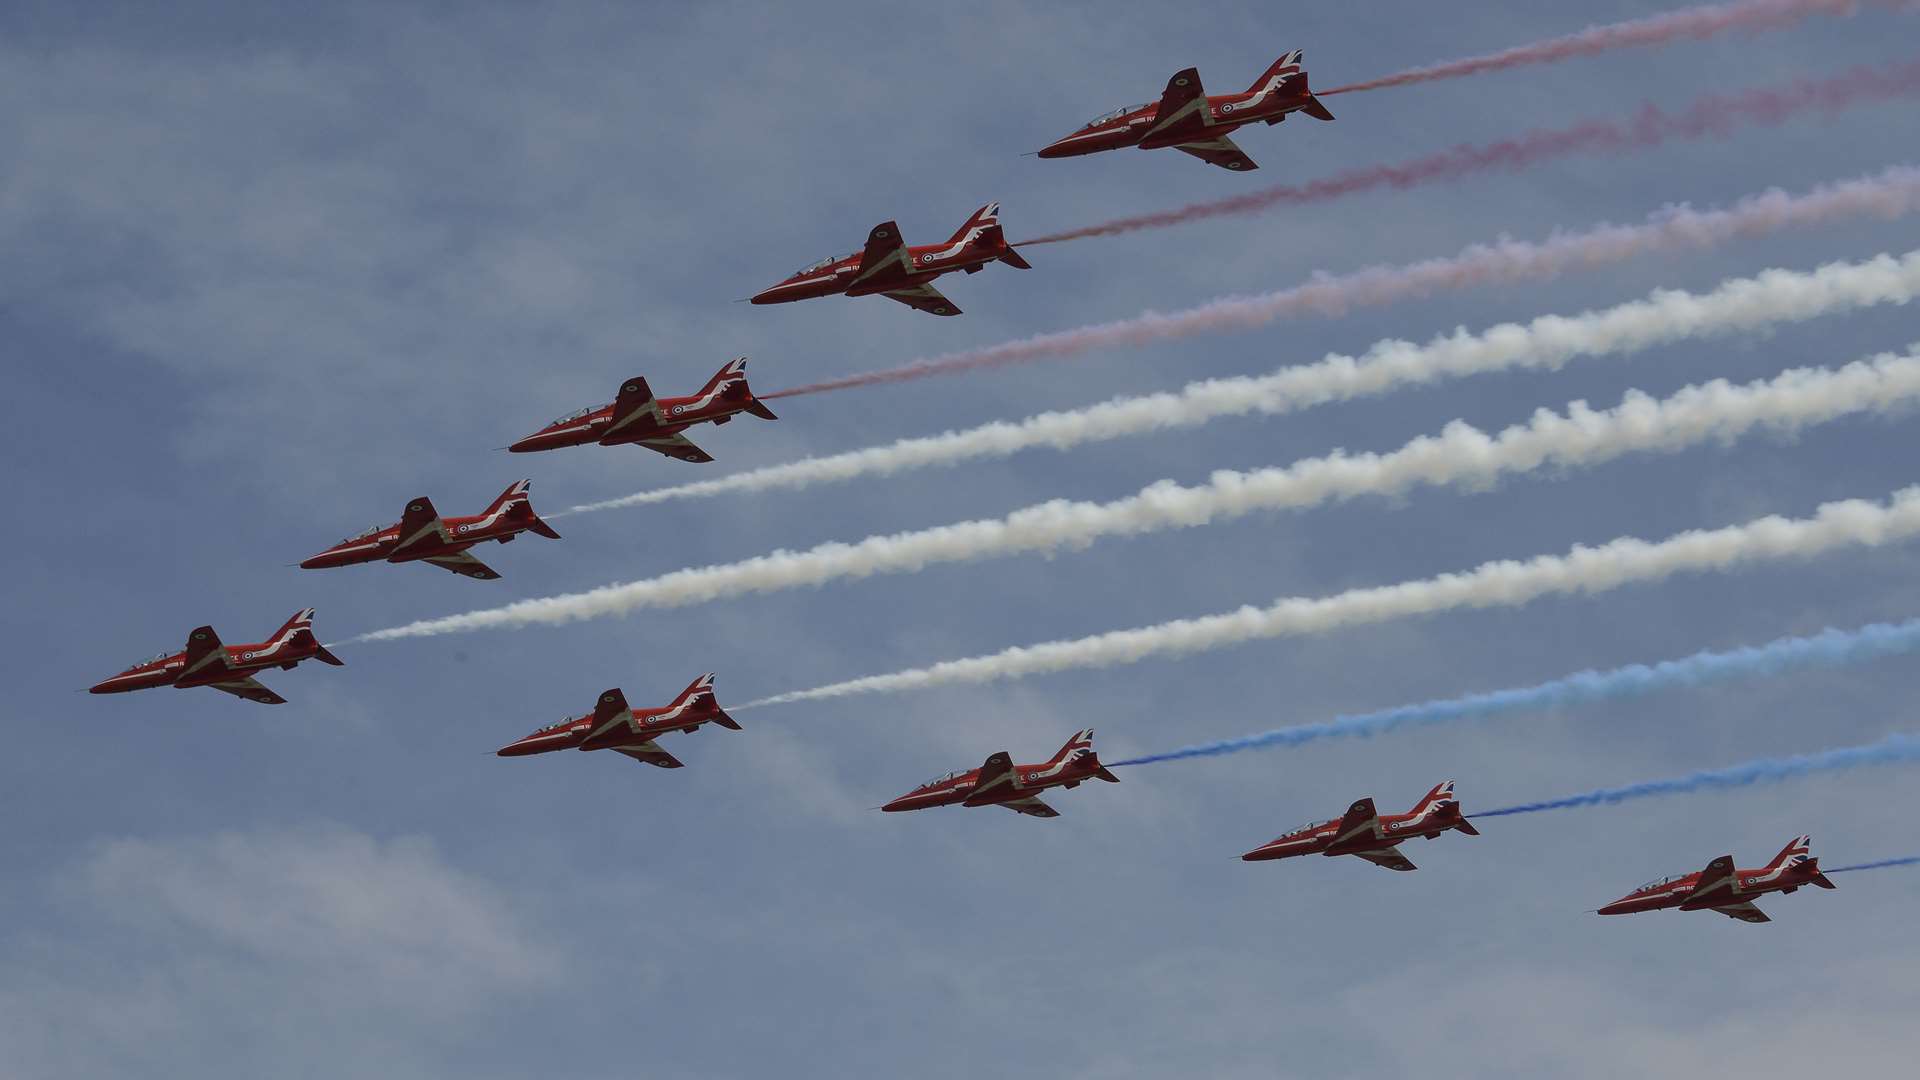 The Red Arrows opened the show last year. Picture: Paul Amos